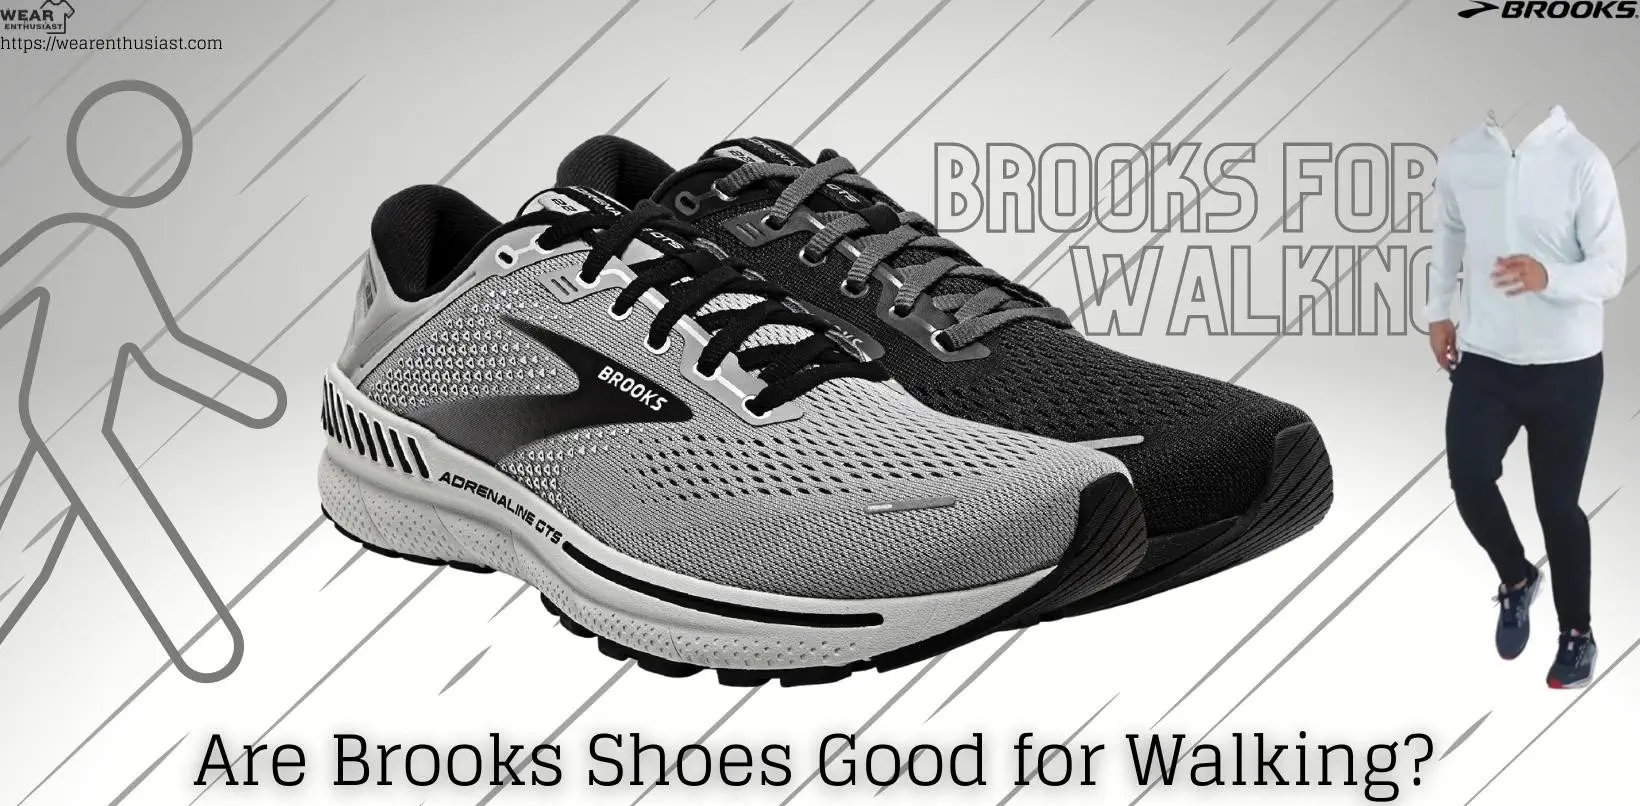 Are Brooks Shoes Good for Walking?